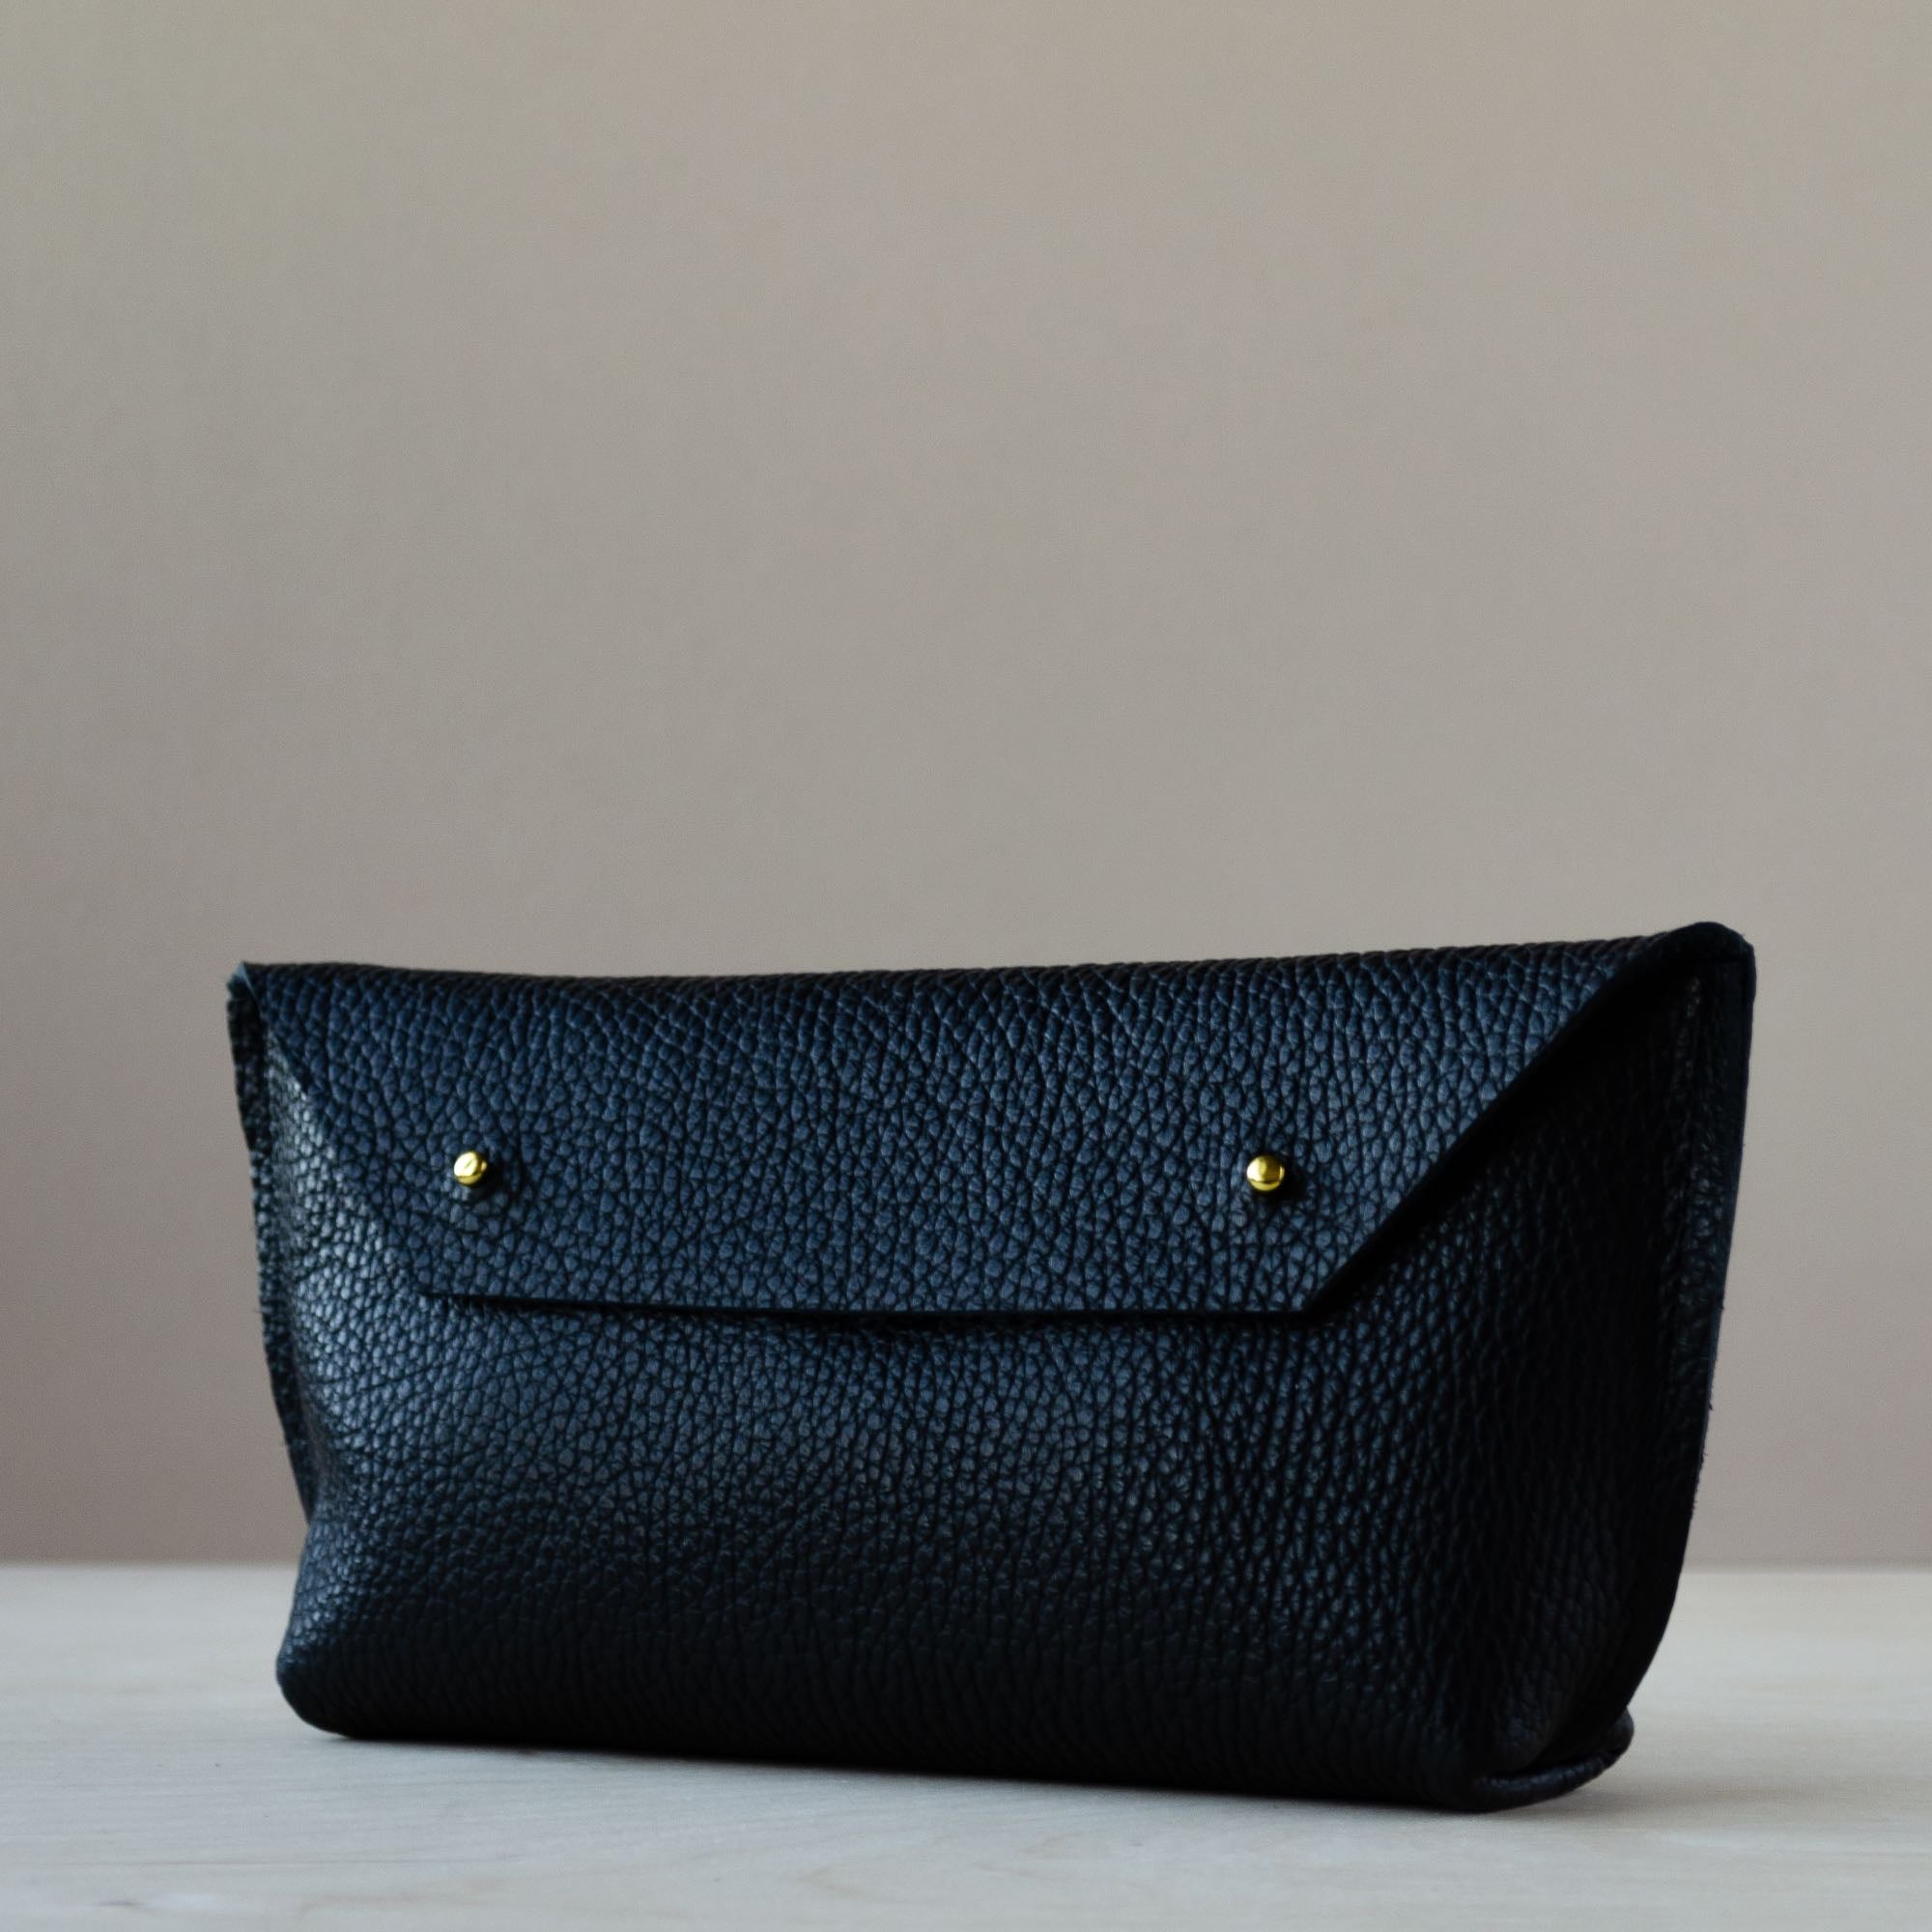 Black Leather Clutch Bag with Gold Fastenings